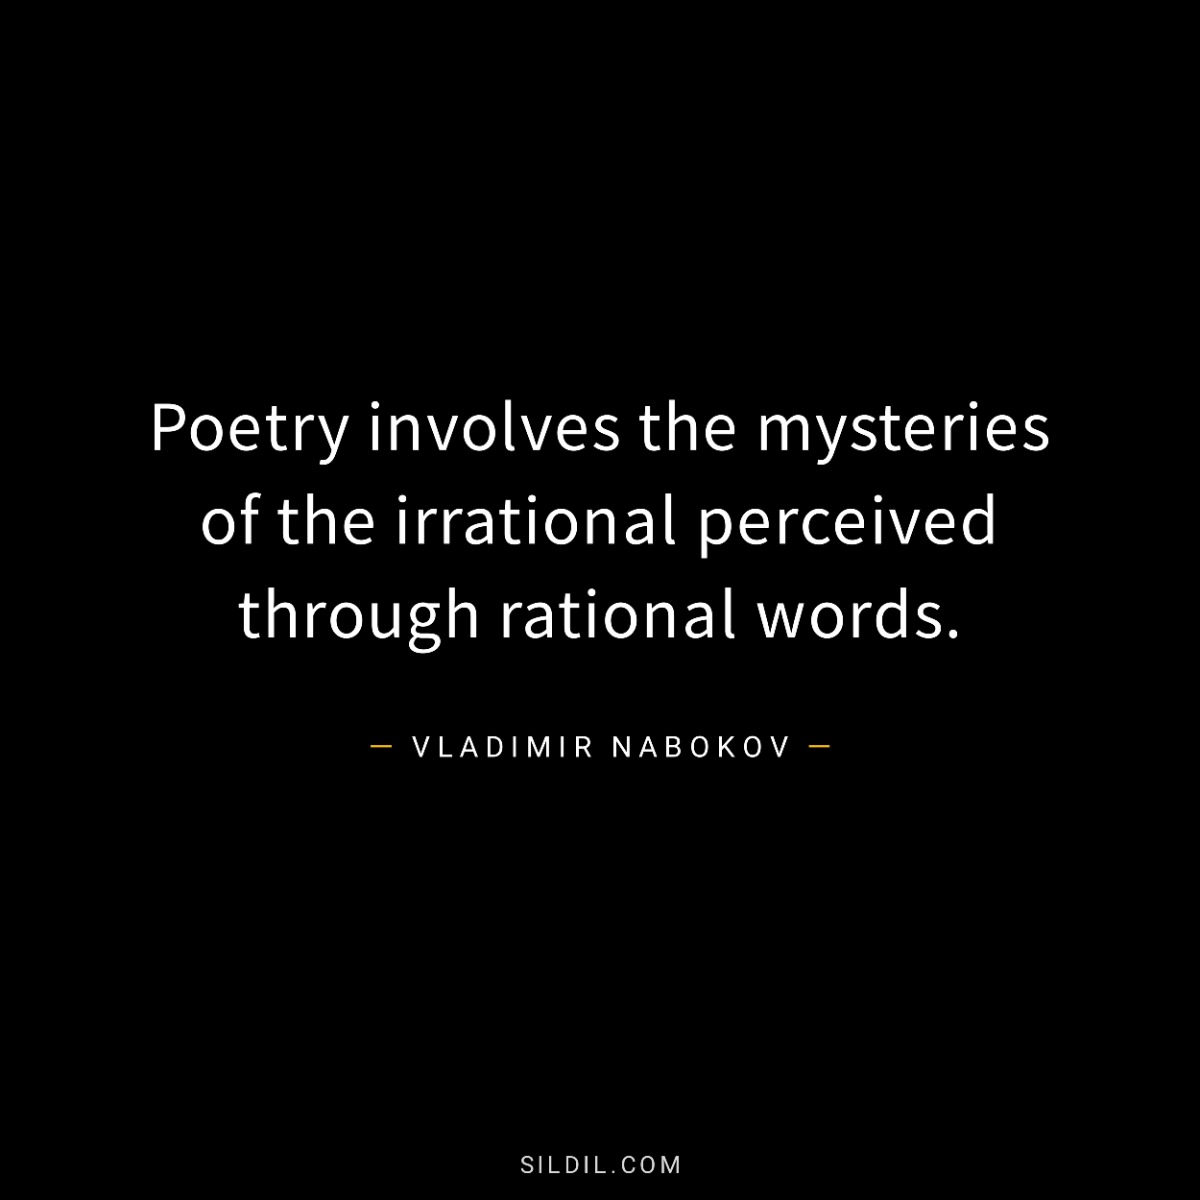 Poetry involves the mysteries of the irrational perceived through rational words.